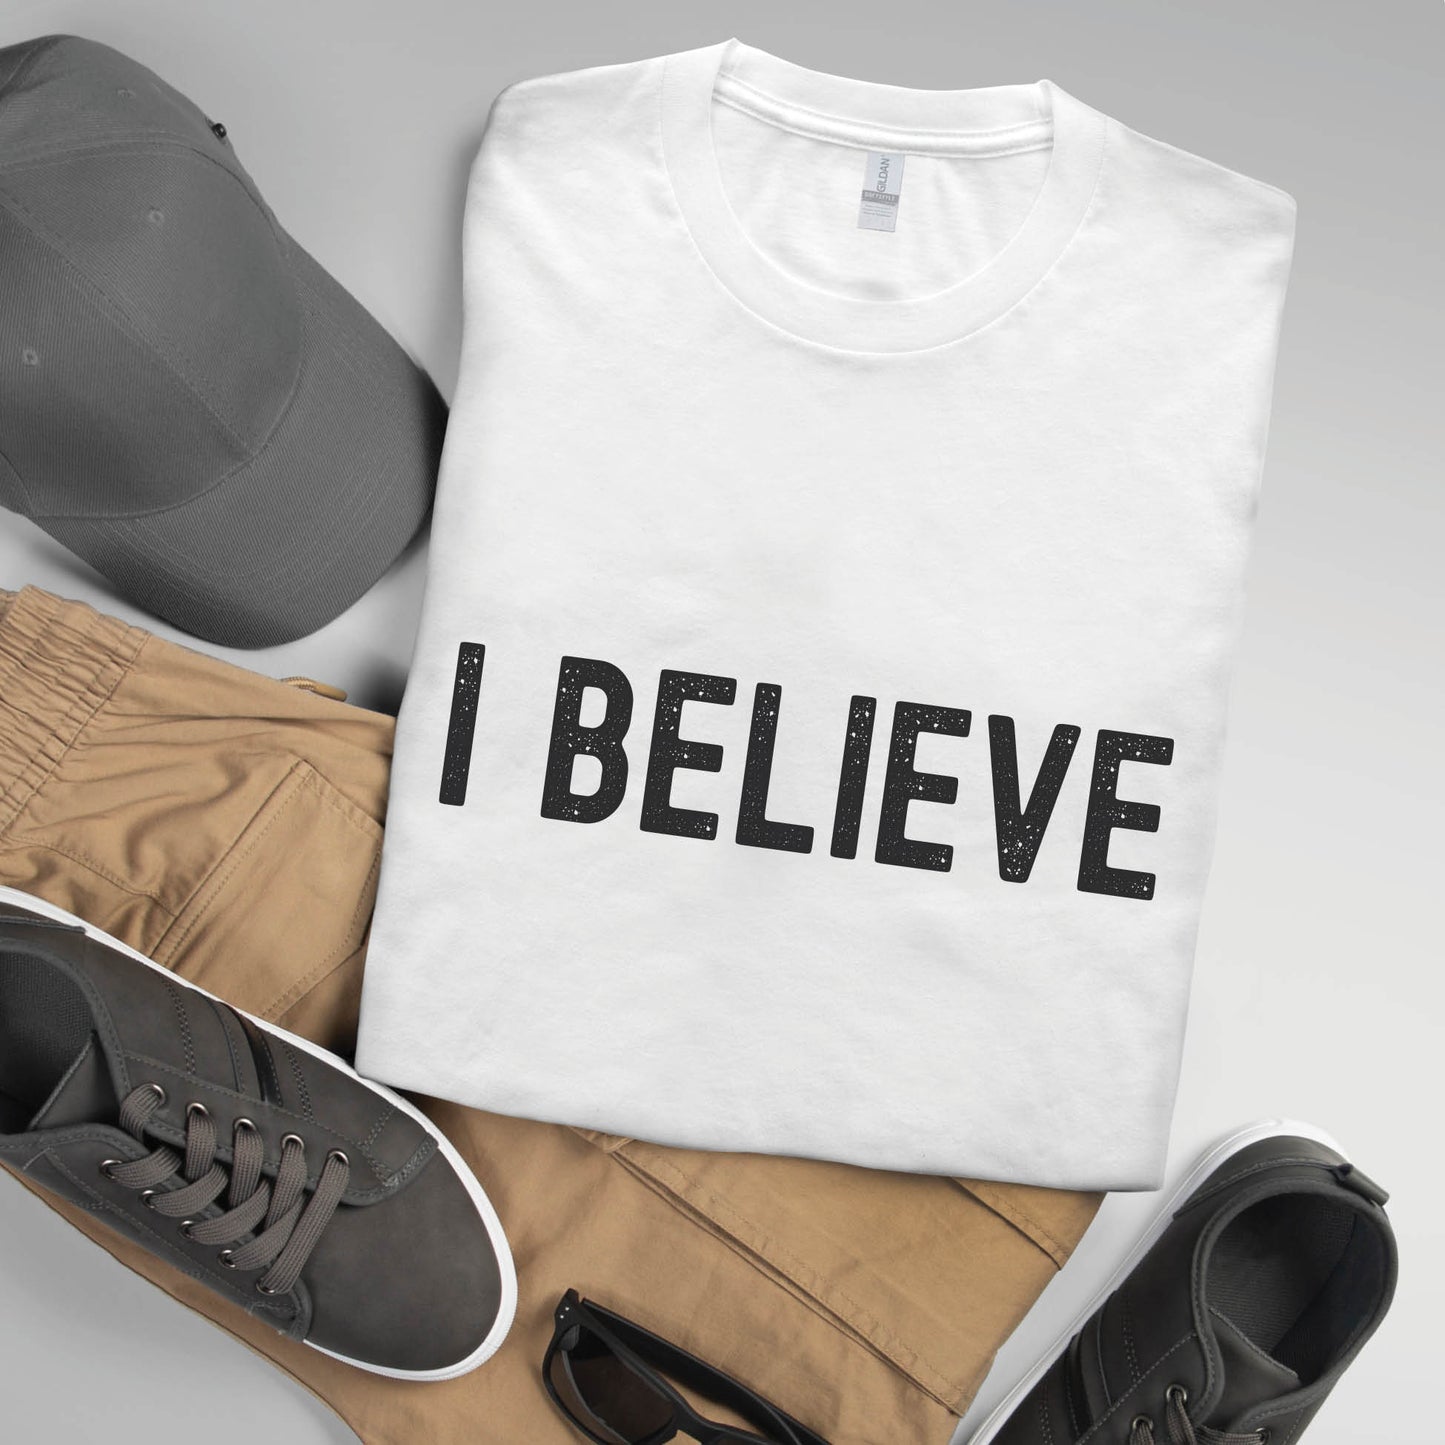 I BELIEVE Christian aesthetic faith-based bold statement distressed typography t-shirt design printed in matte black on white unisex fit t-shirt, designed for men & women believers